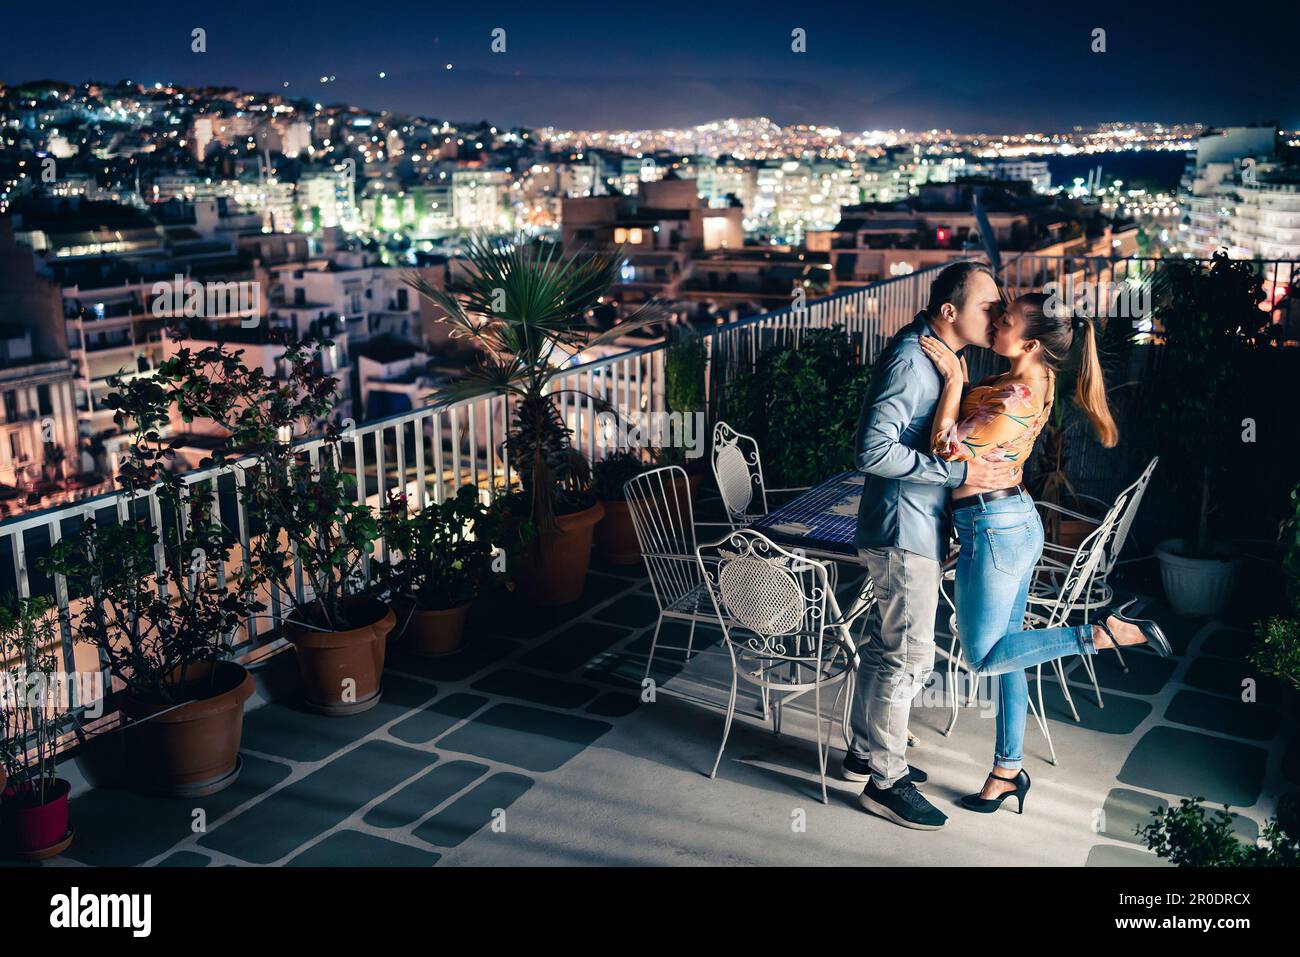 Couple at night, city lights view. Romantic date or proposal. Man and woman kiss and embrace on balcony or roof terrace. Dark blue sky. Stock Photo